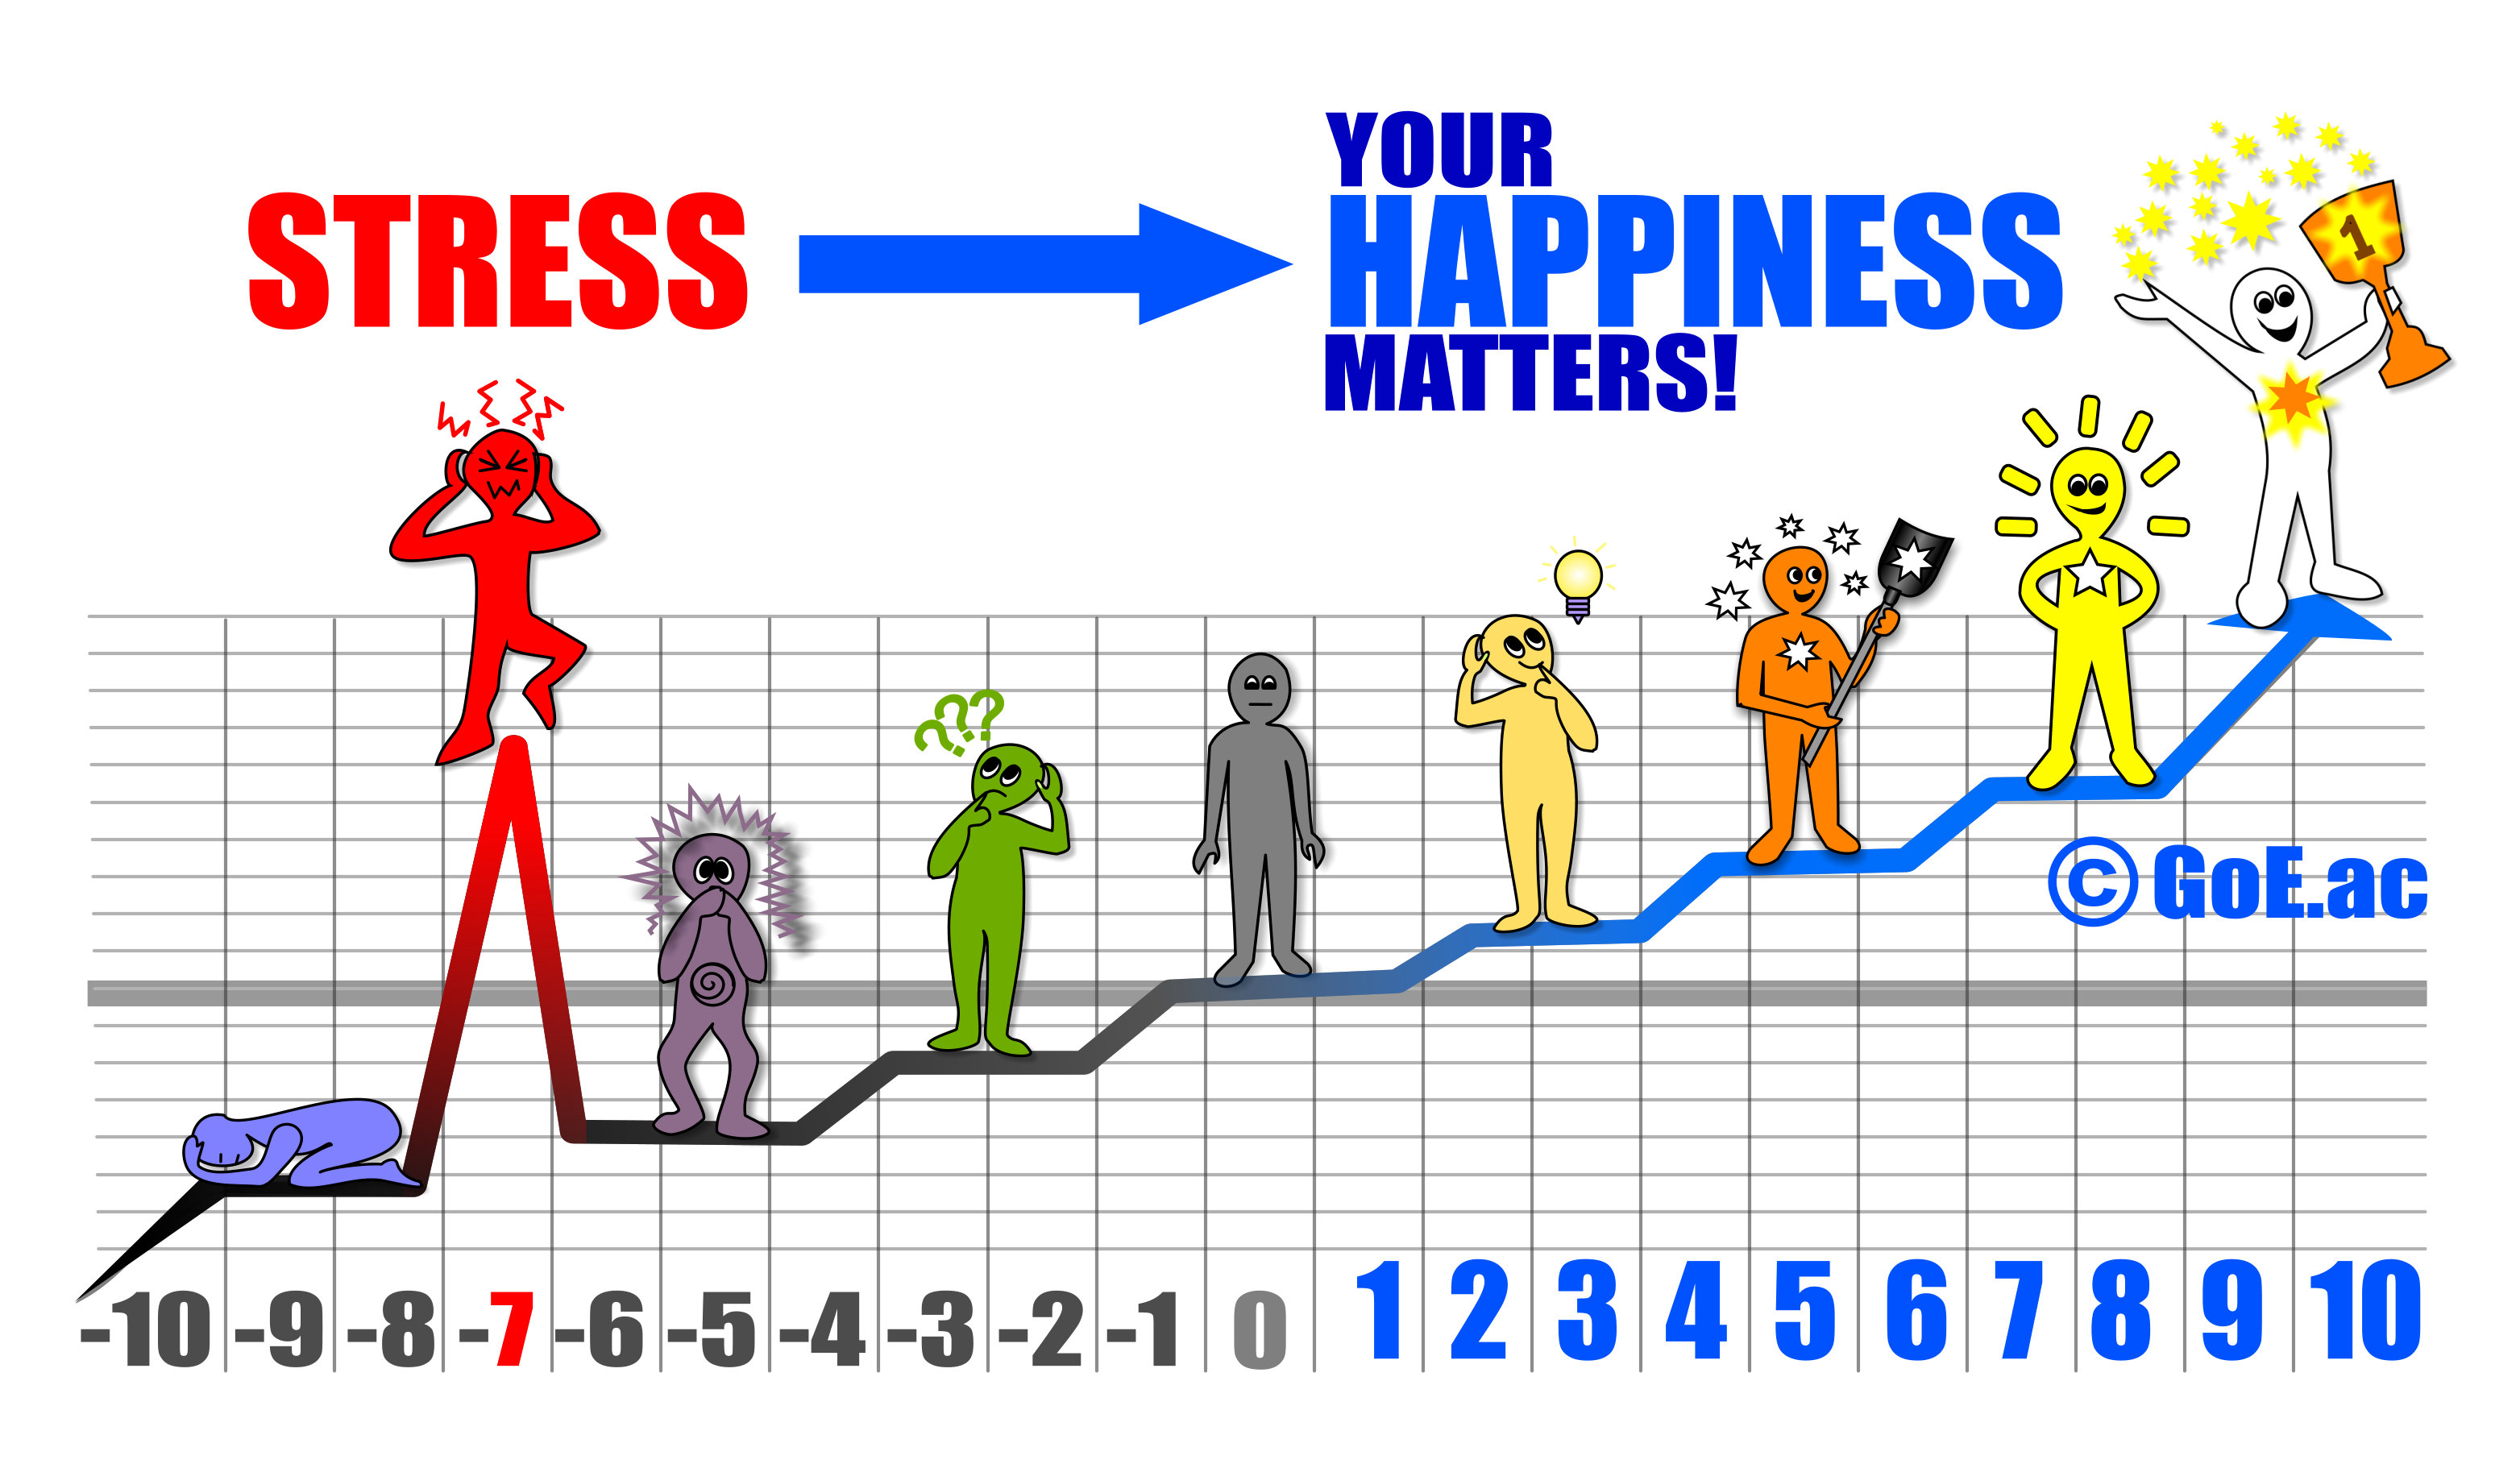 Your Happiness Matters